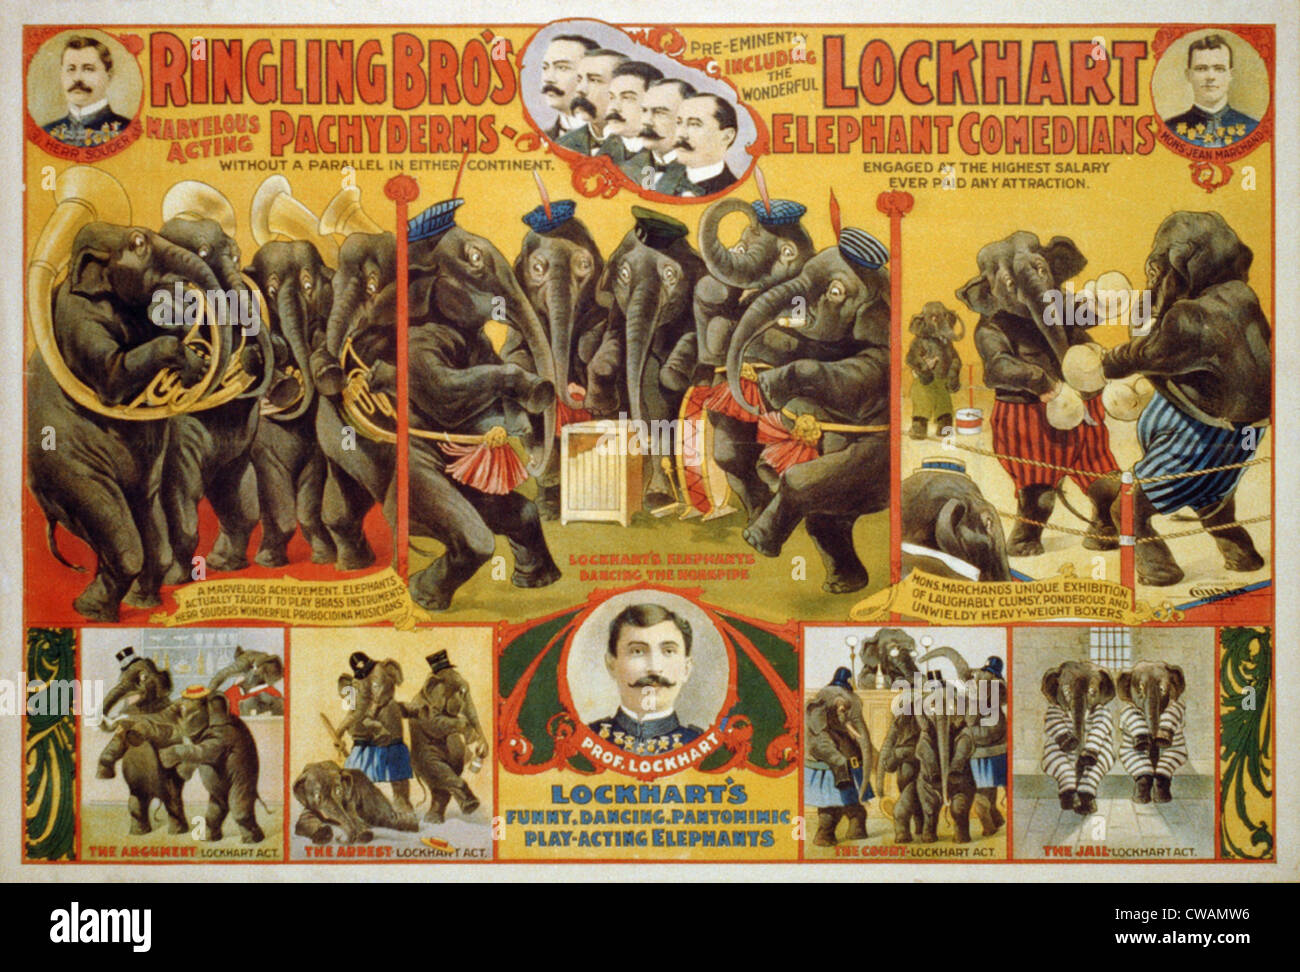 Poster for Ringling Bro's circus featuring a performing elephants, playing musical instruments and boxing. Stock Photo